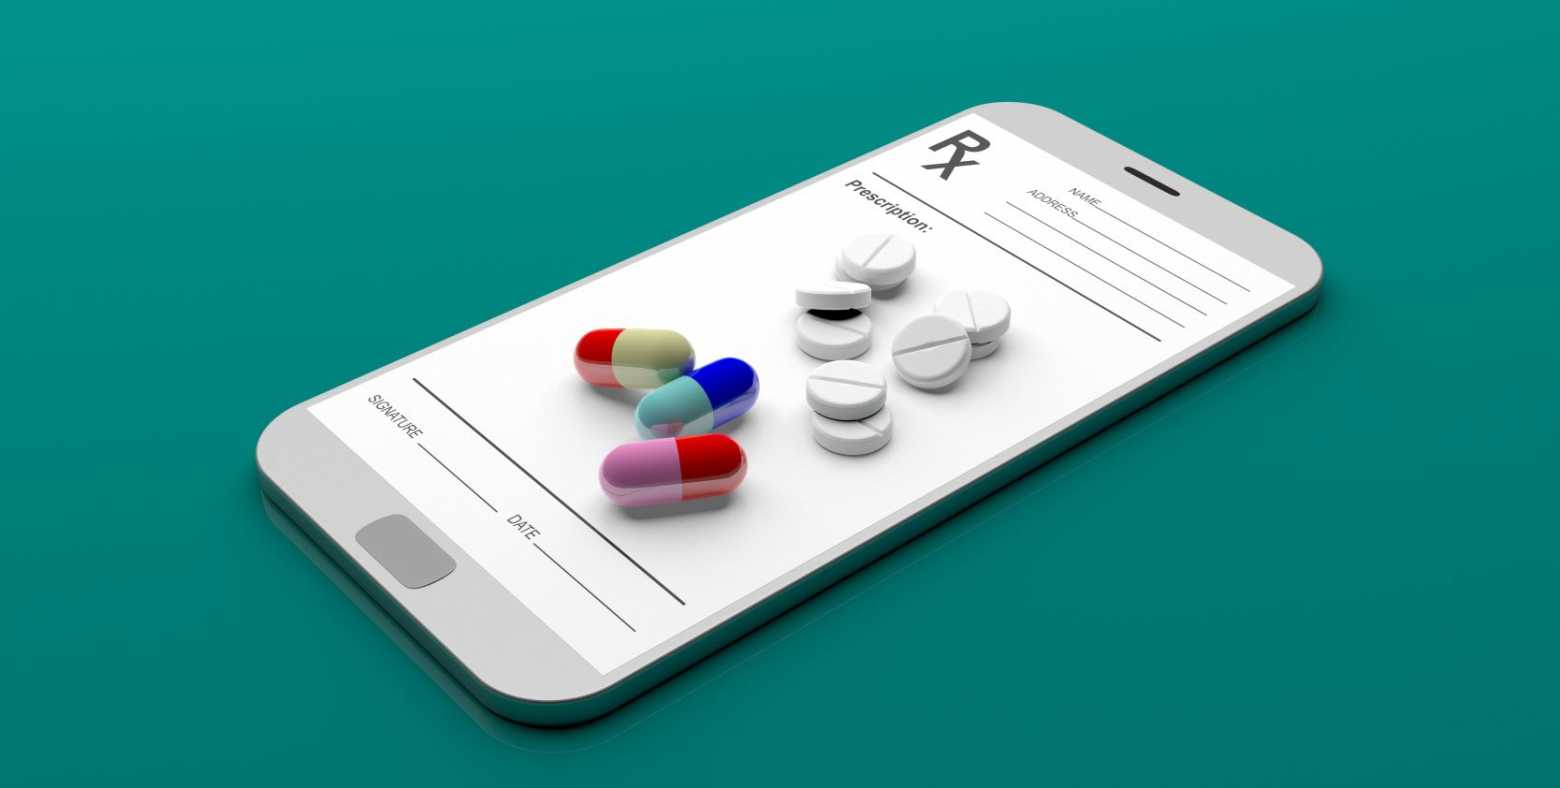 phone with image of online rx form and pills 